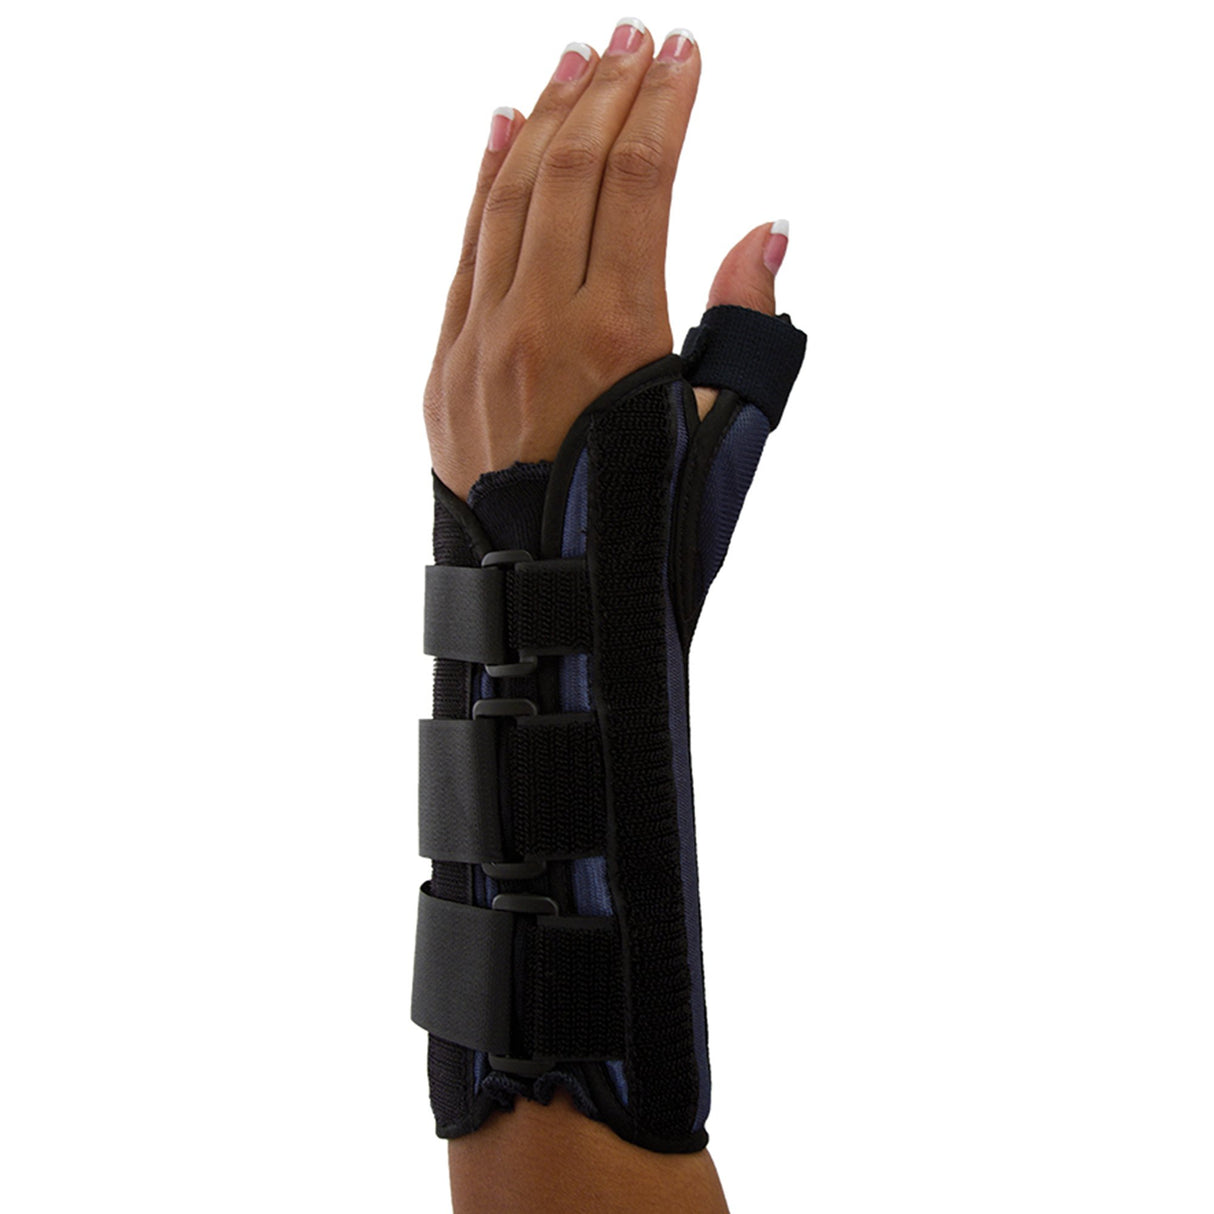 Premier® Left Hand Wrist Brace with Thumb Spica, Small